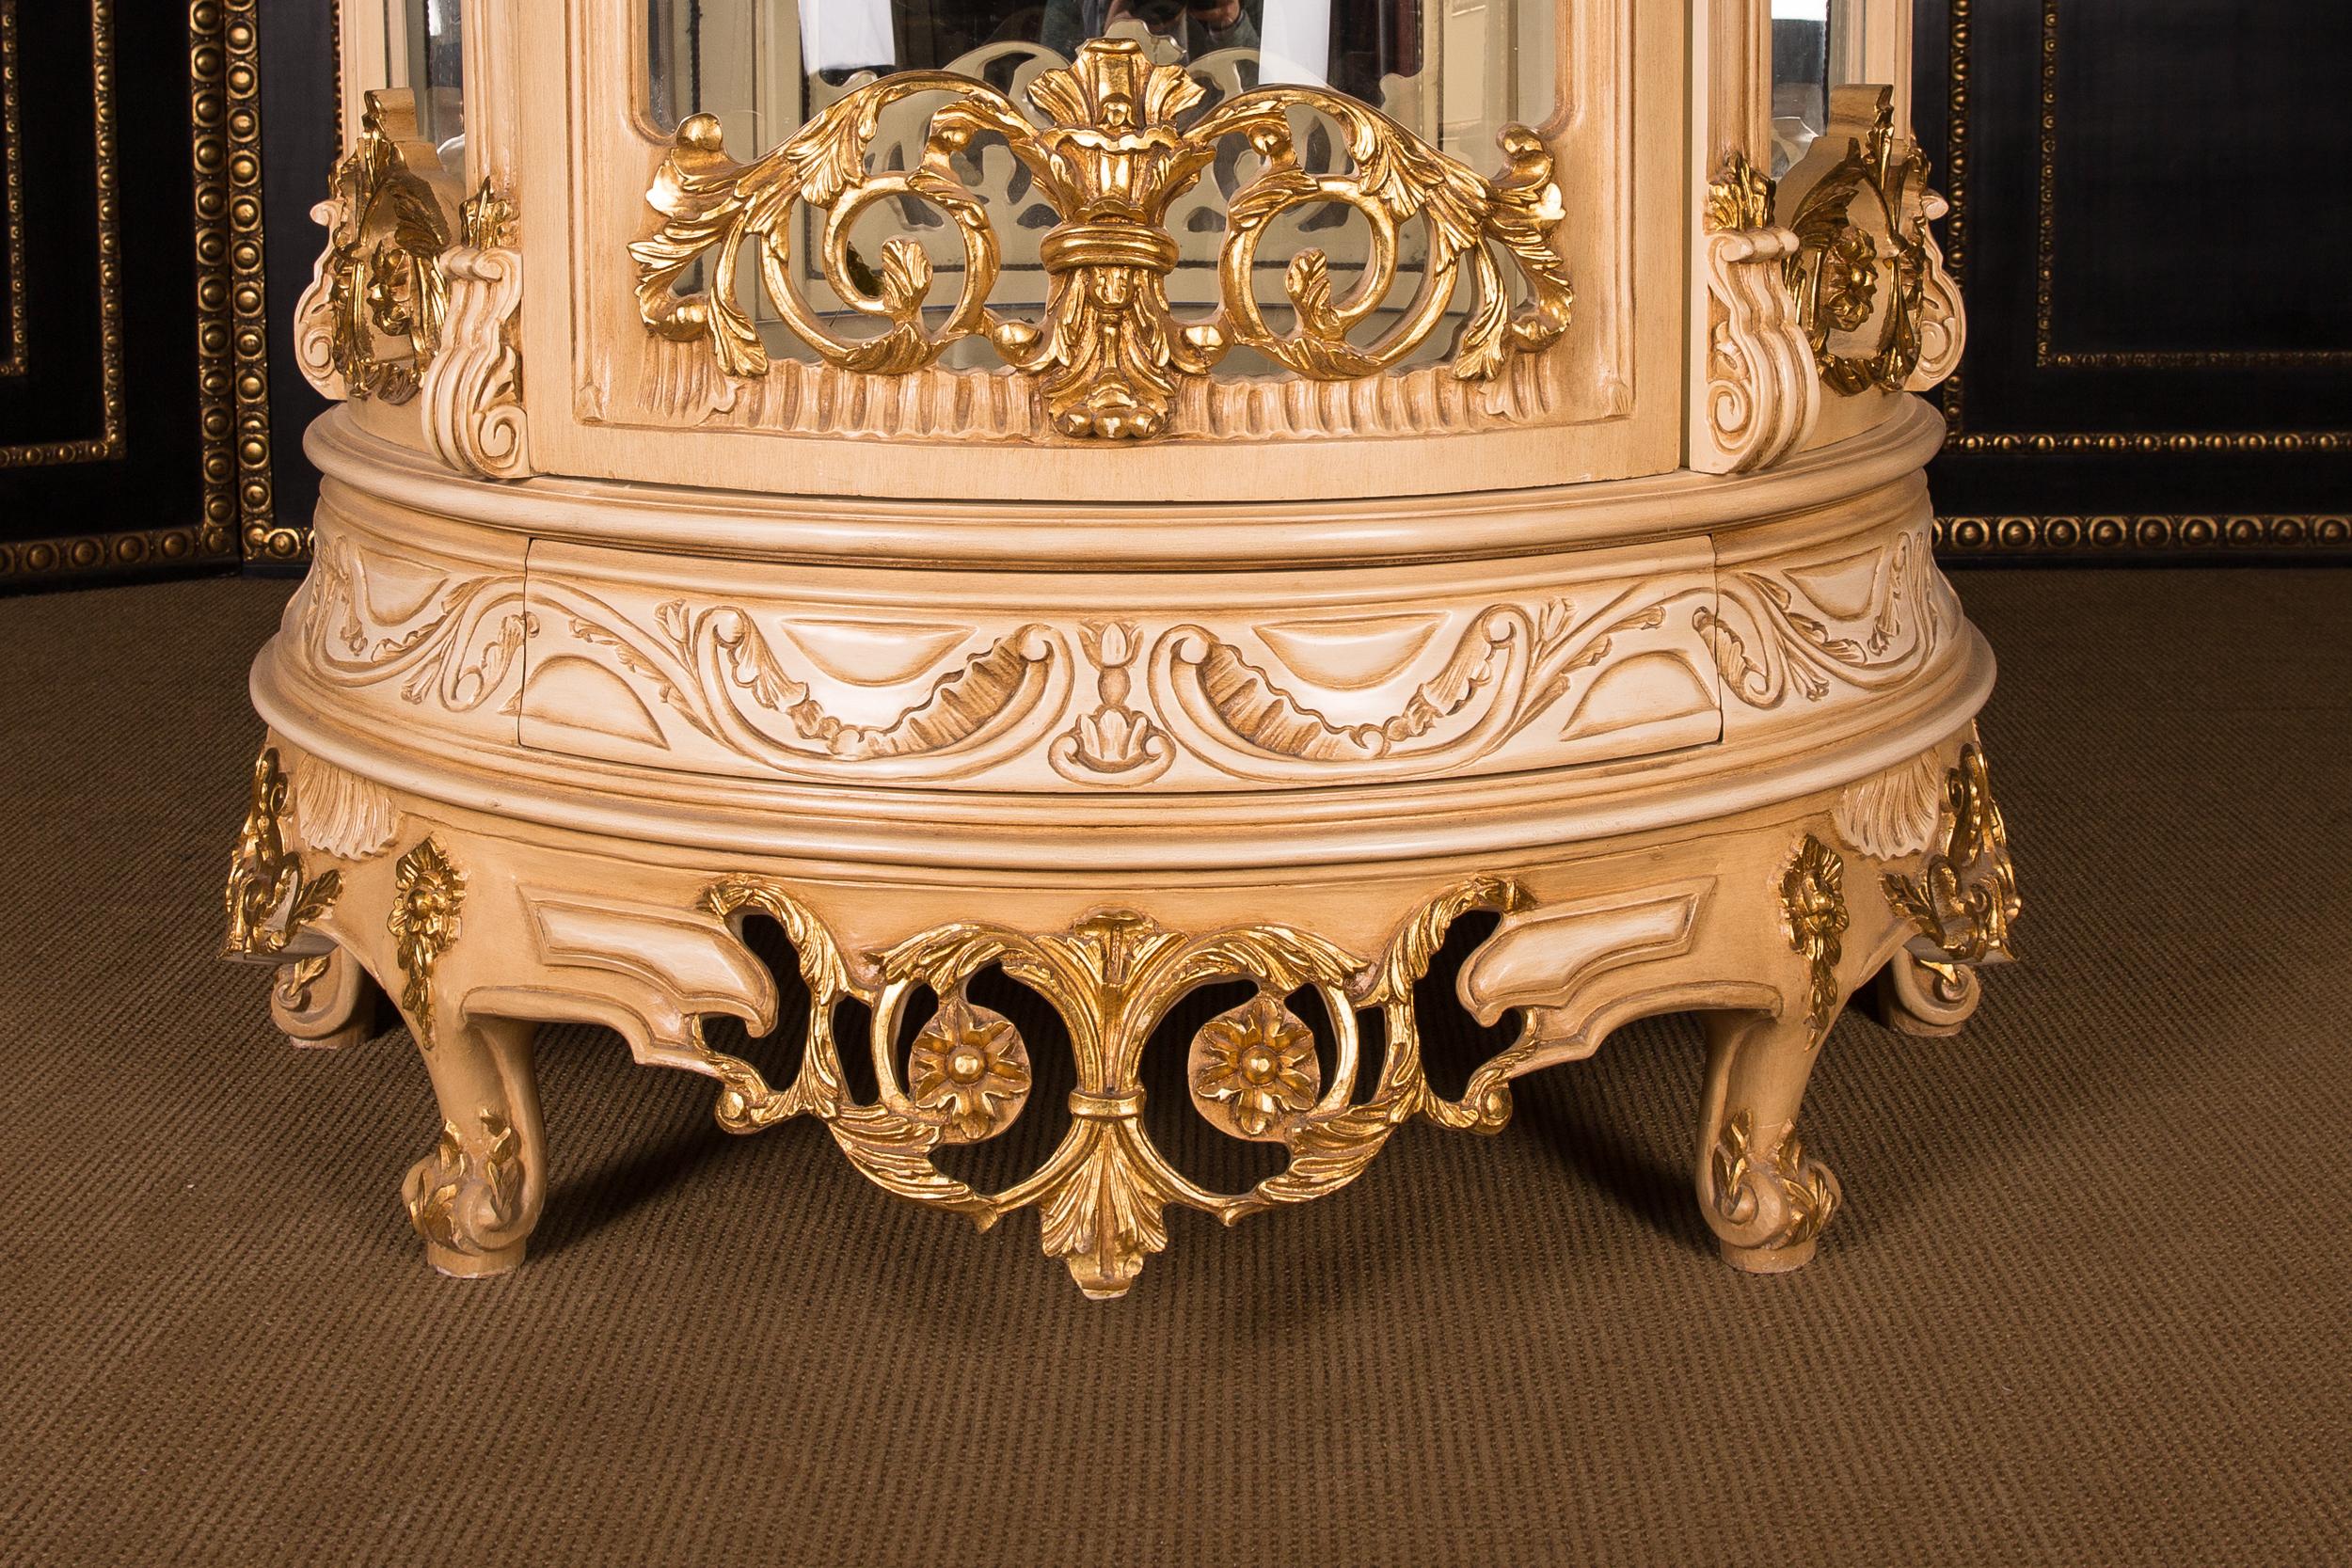 Massive, finely carved beechwood, colored and gilt gilded. High-rectangular, half-round and one-door cambered body, glazed from three sides. The entire showcase can be dismantled. On curved feet one-door scalloped frame. Back wall mirrored, three